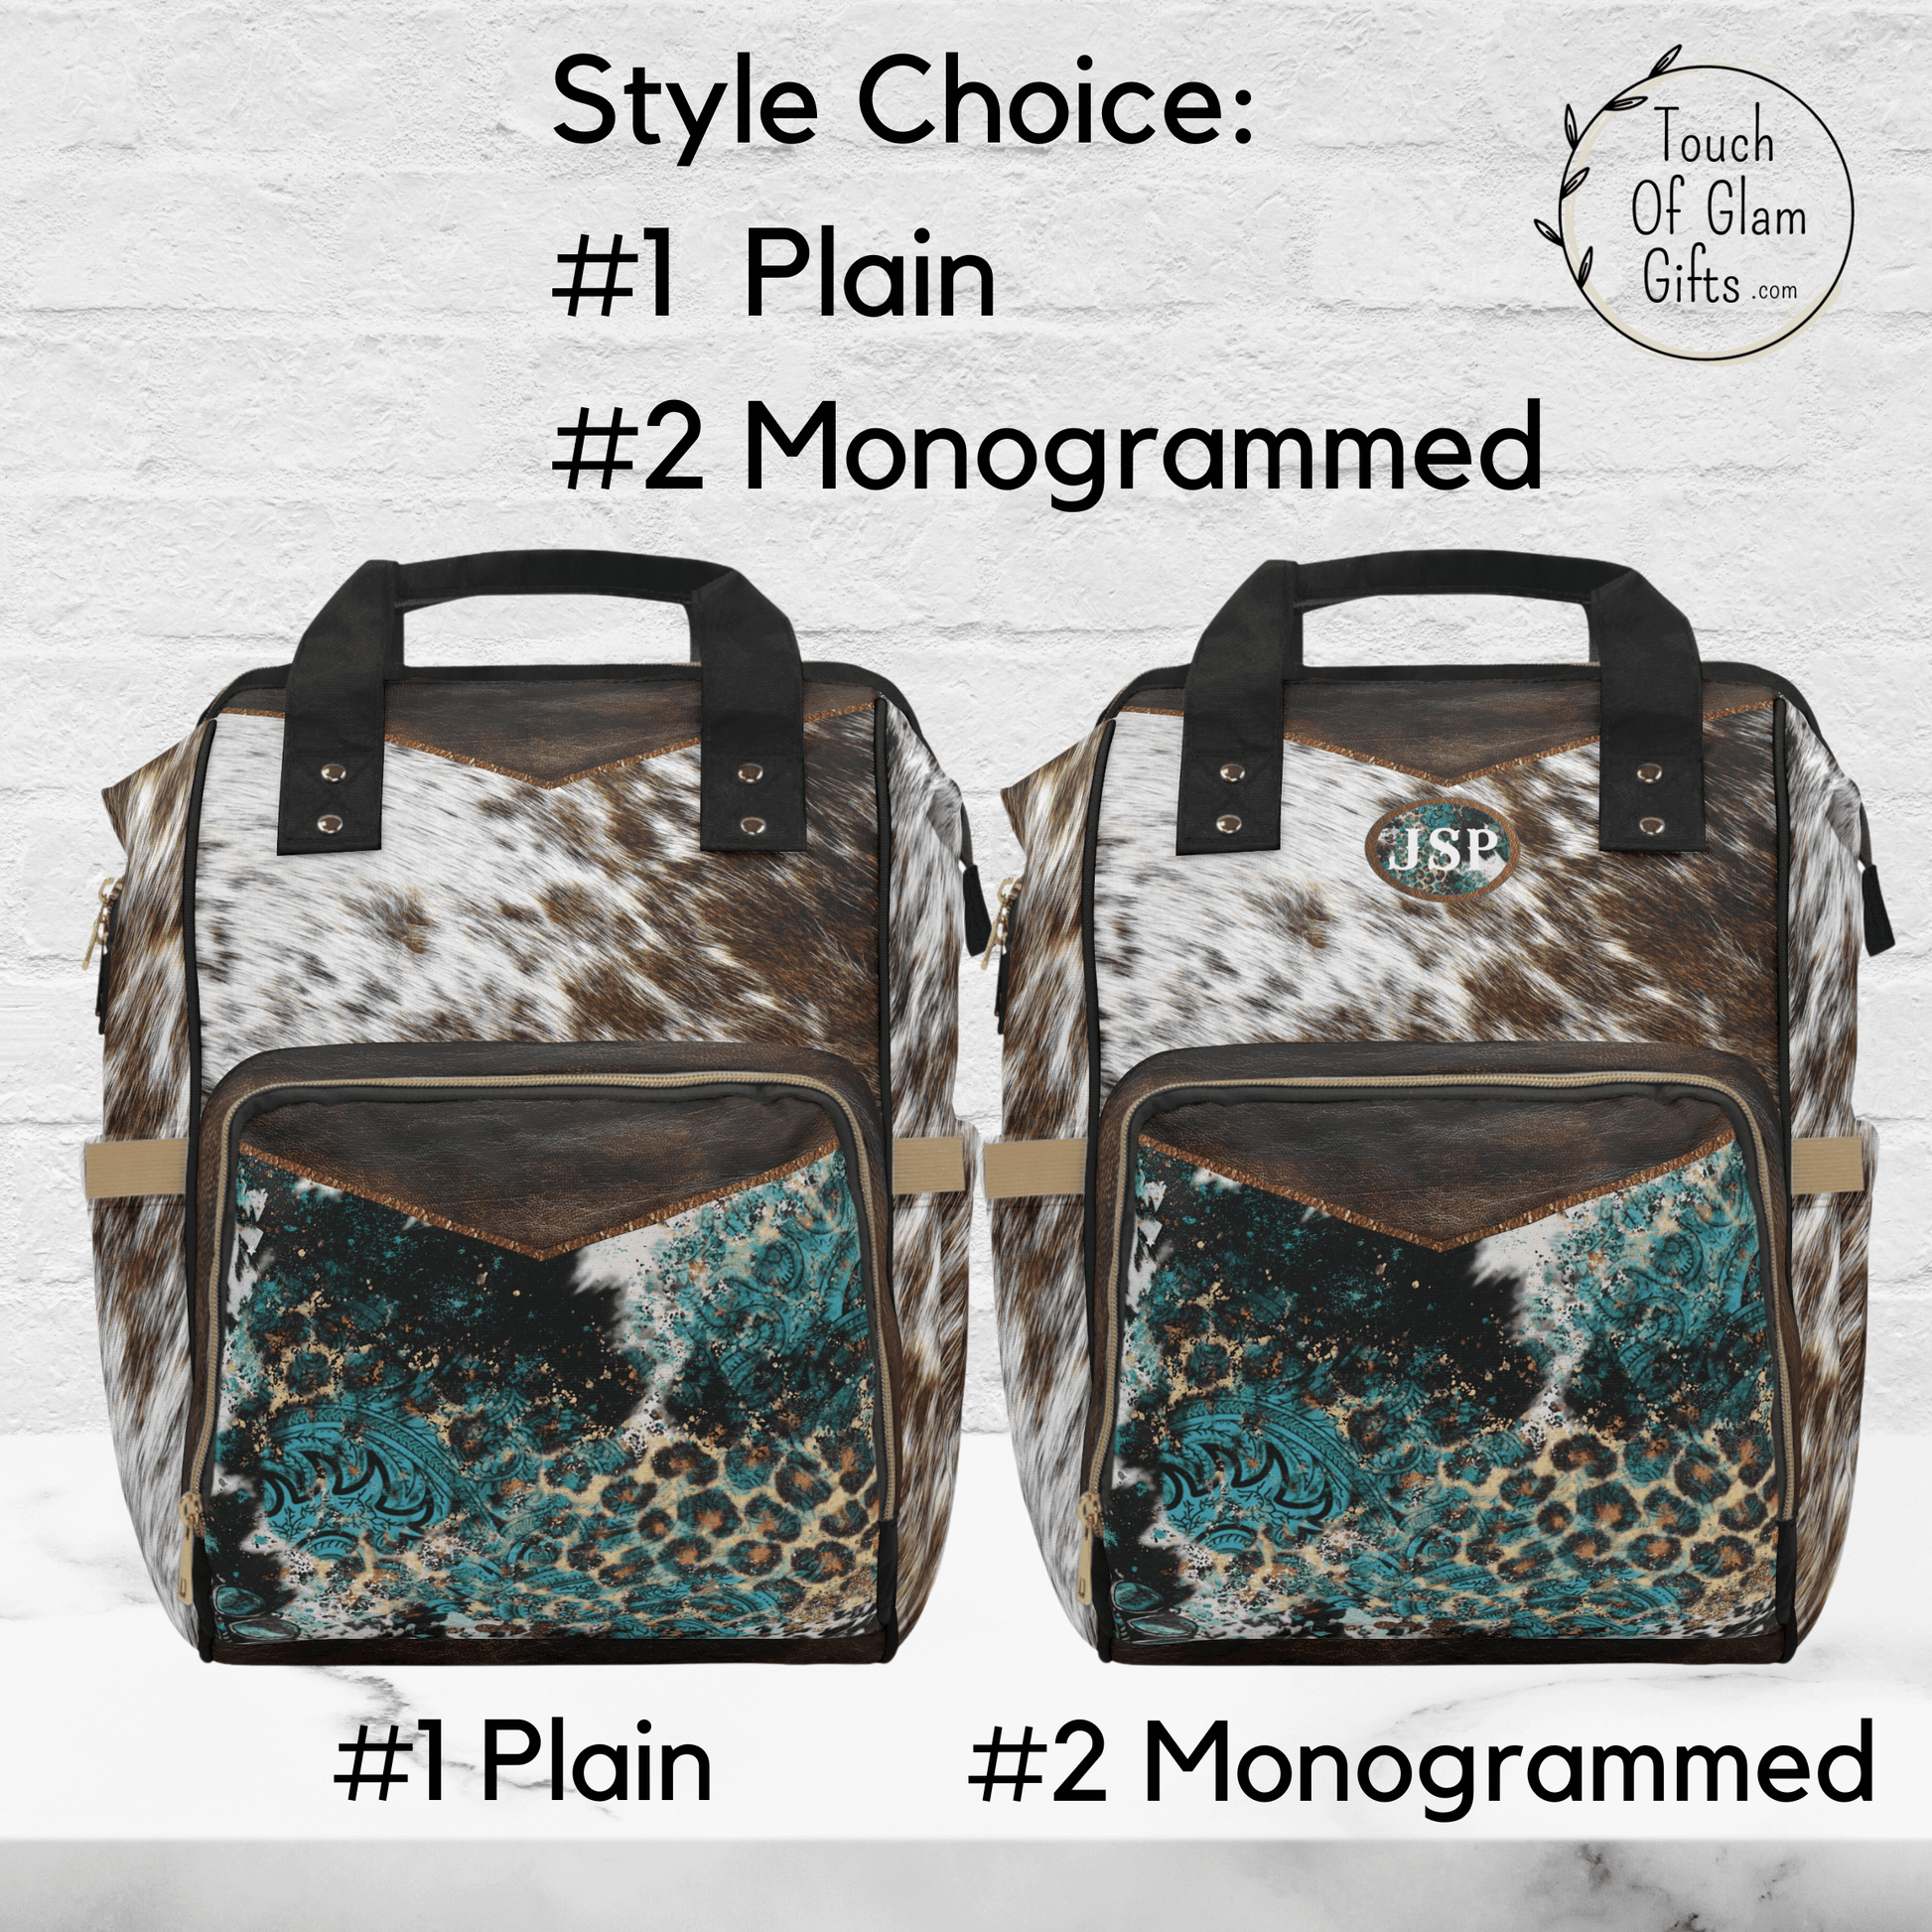 Style choices for our western diaper bag backpack is plain or monogrammed. The monogrammed patch matches the turquoise animal print on the front pocket.